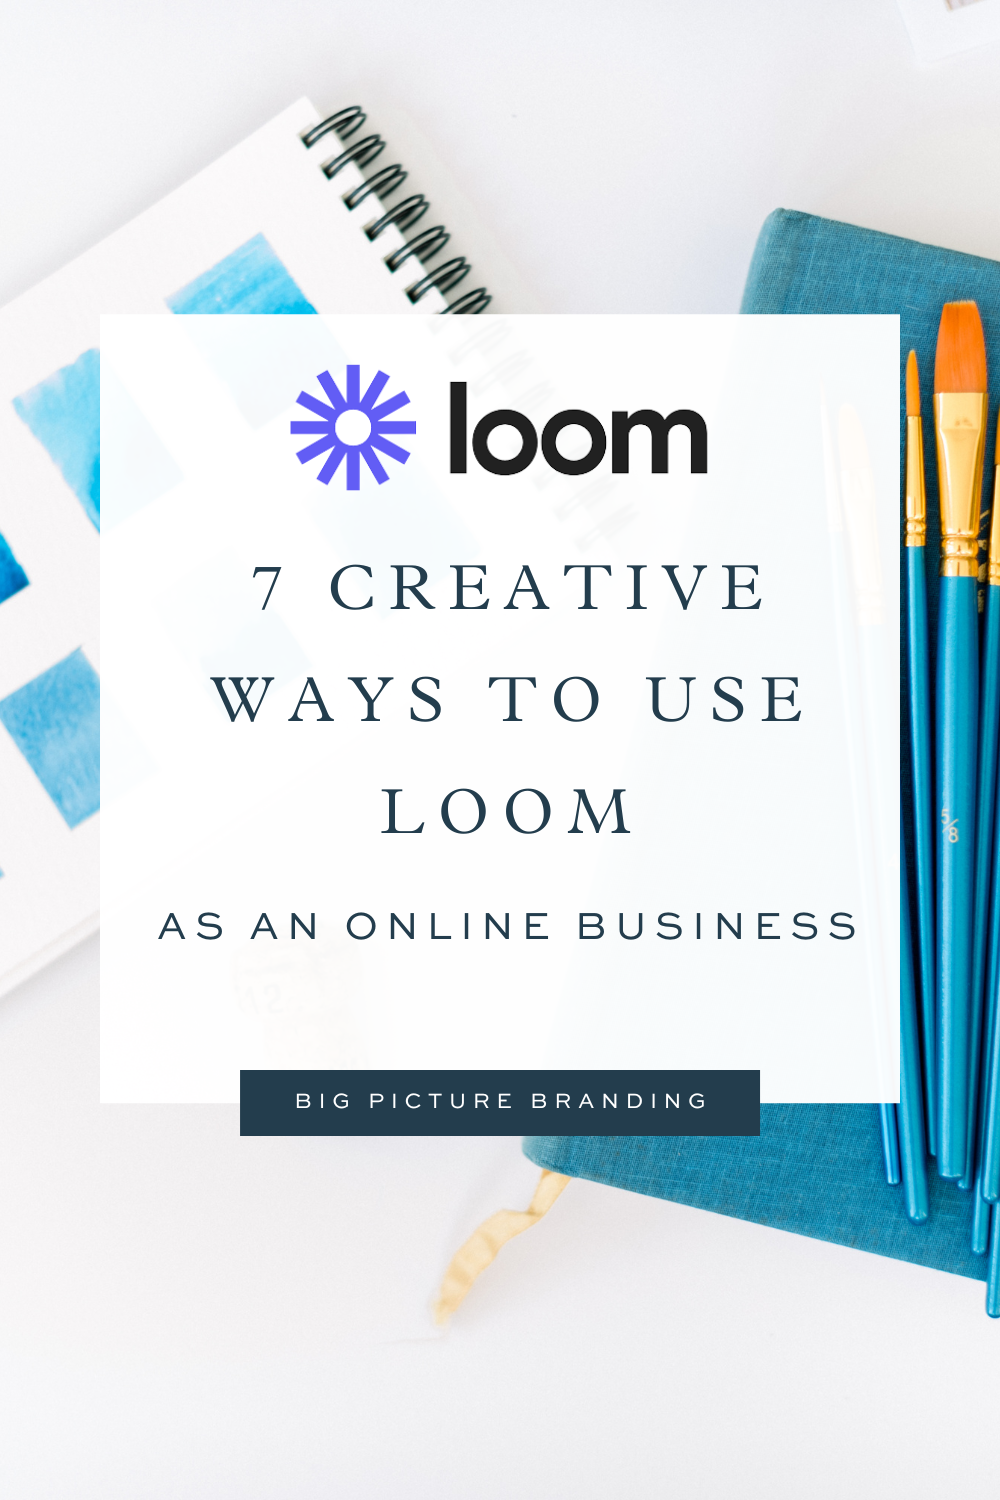 How to use Loom video recording online business